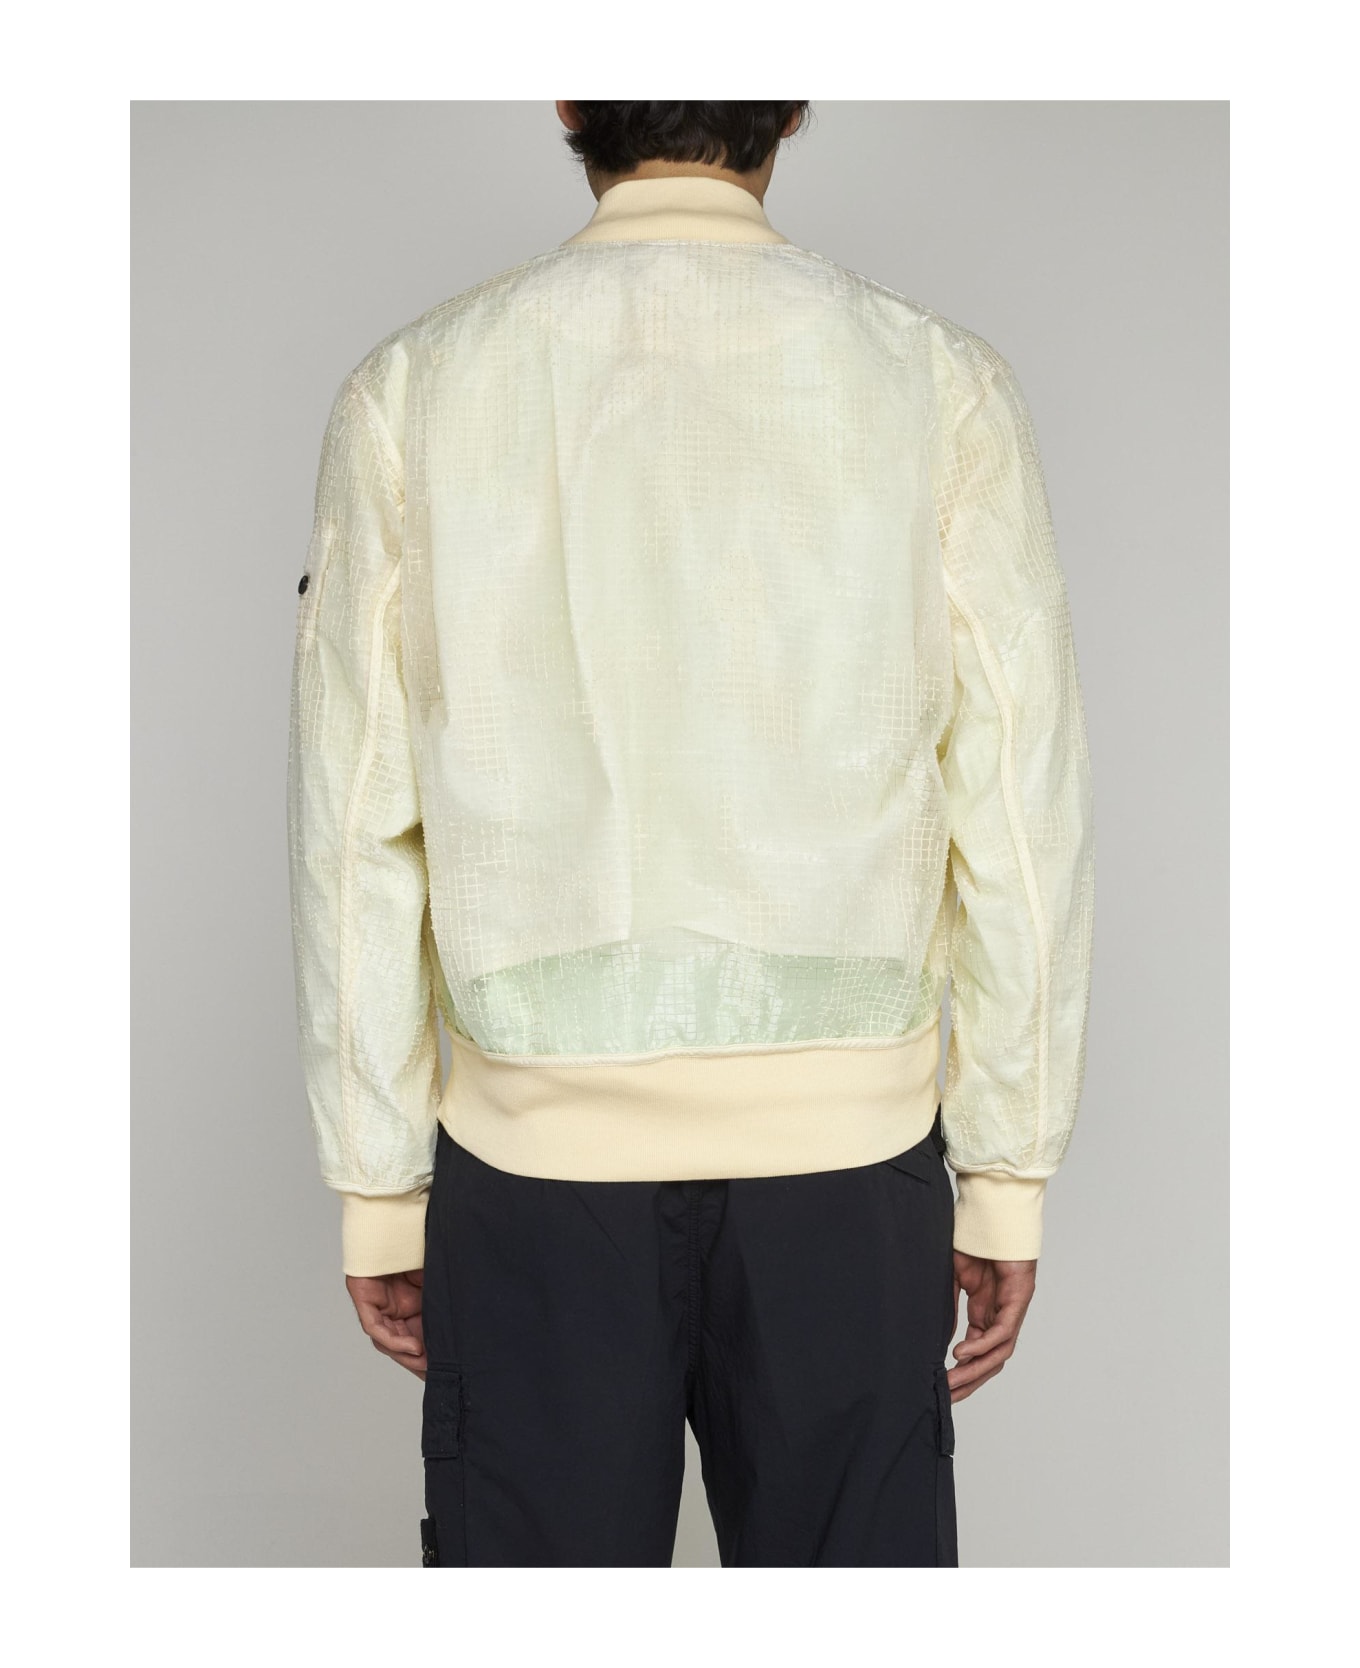 Stone Island Shadow Project Technical Cotton Blend Bomber Jacket - Butter